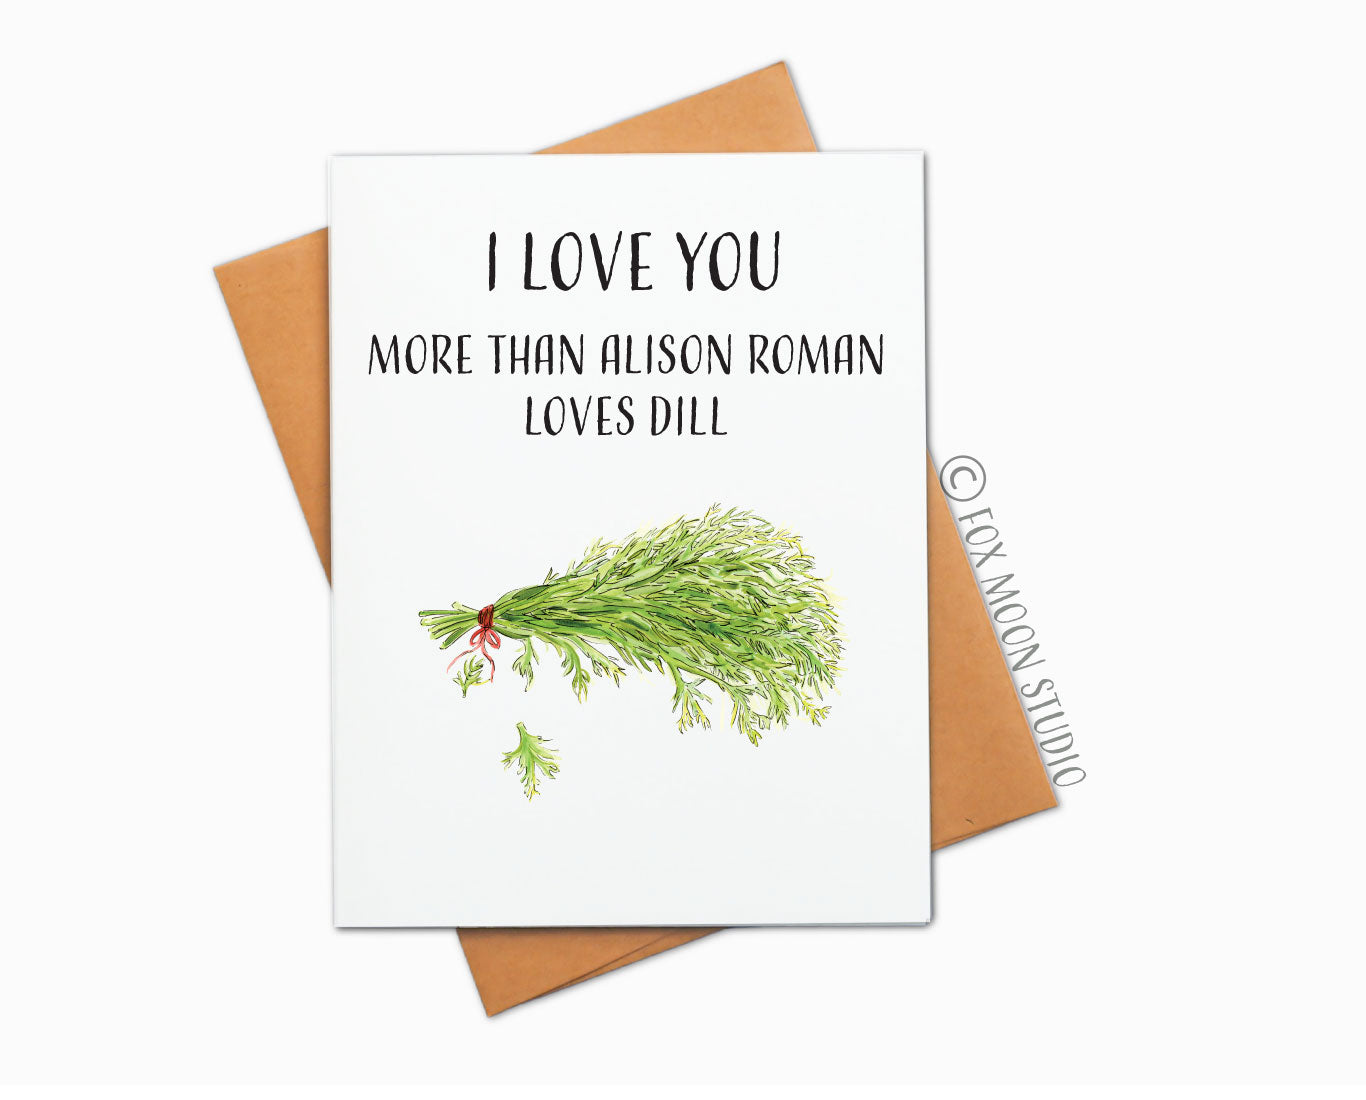 I Love You More Than Alison Roman Loves Dill - Humor Foodie Greeting Card